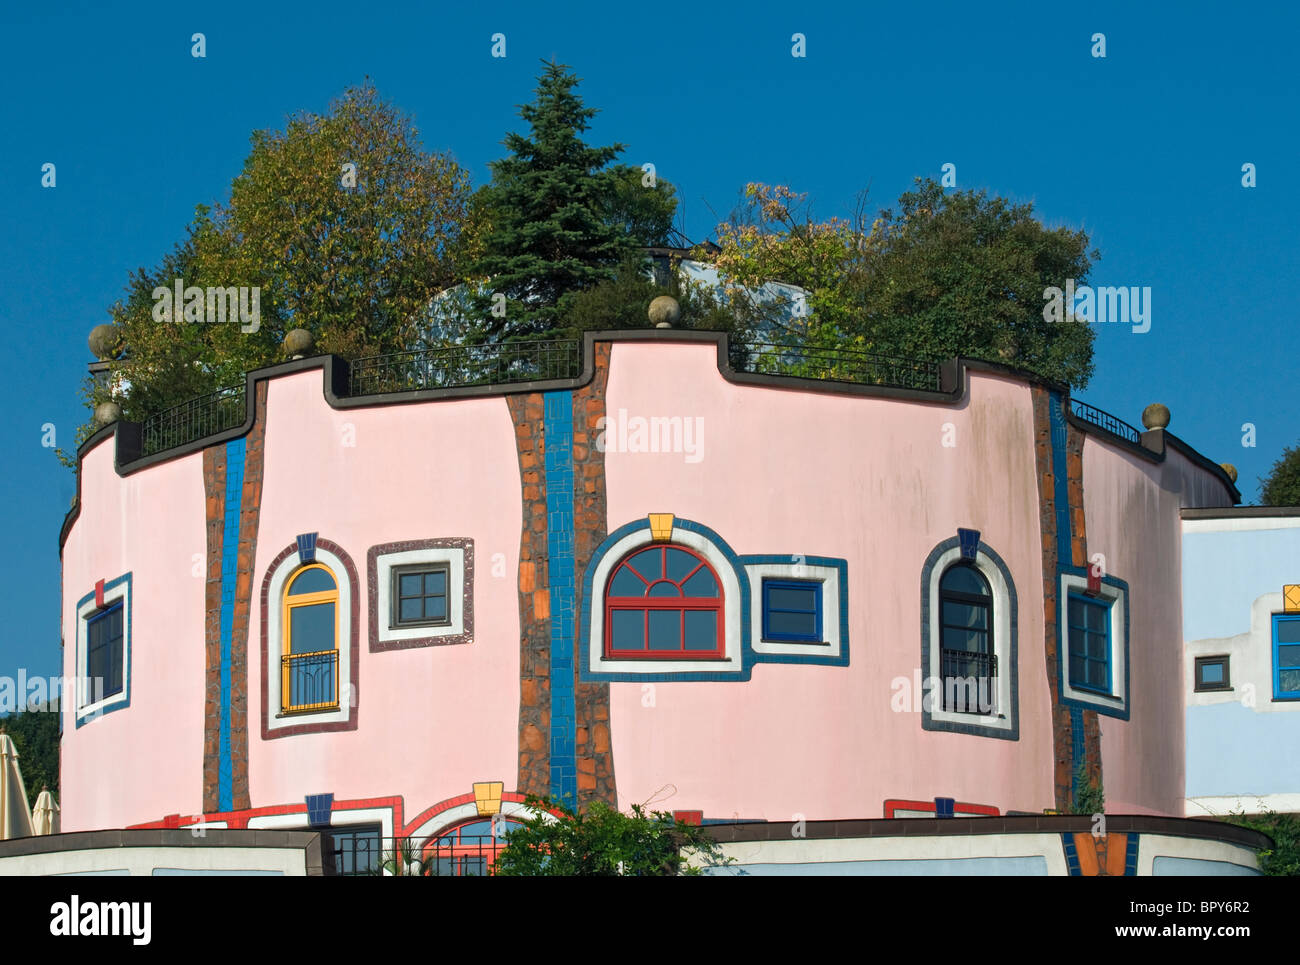 Building of Geistreich Conference Centre at Rogner Bad Blumau Thermal Spa and Hotel Designed by Hundertwasser, Styria, Austria Stock Photo